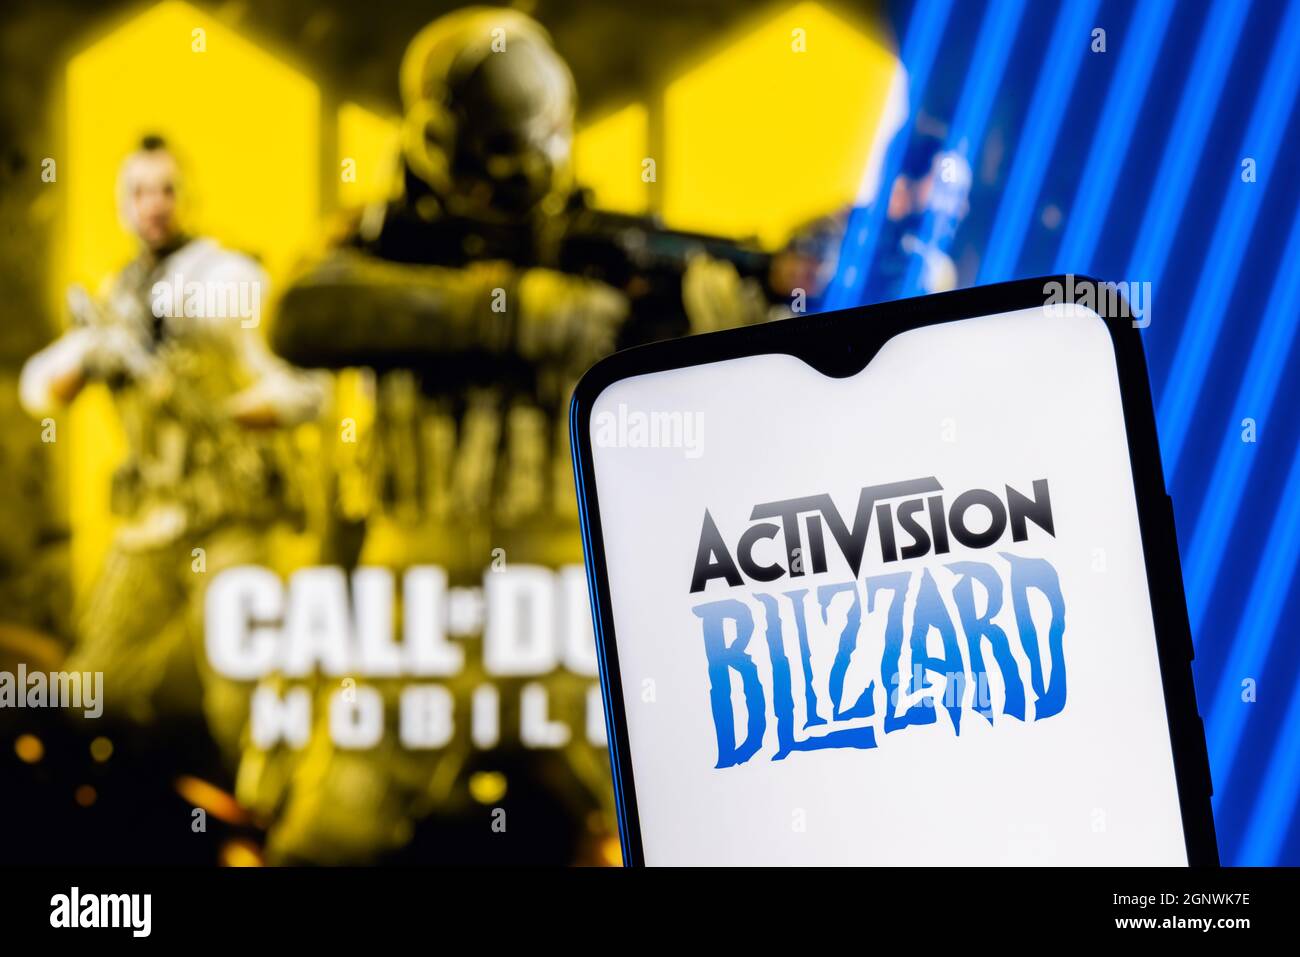 Activision Blizzard logo on smartphone screen. A frame from the Call of Duty on the background. Stock Photo